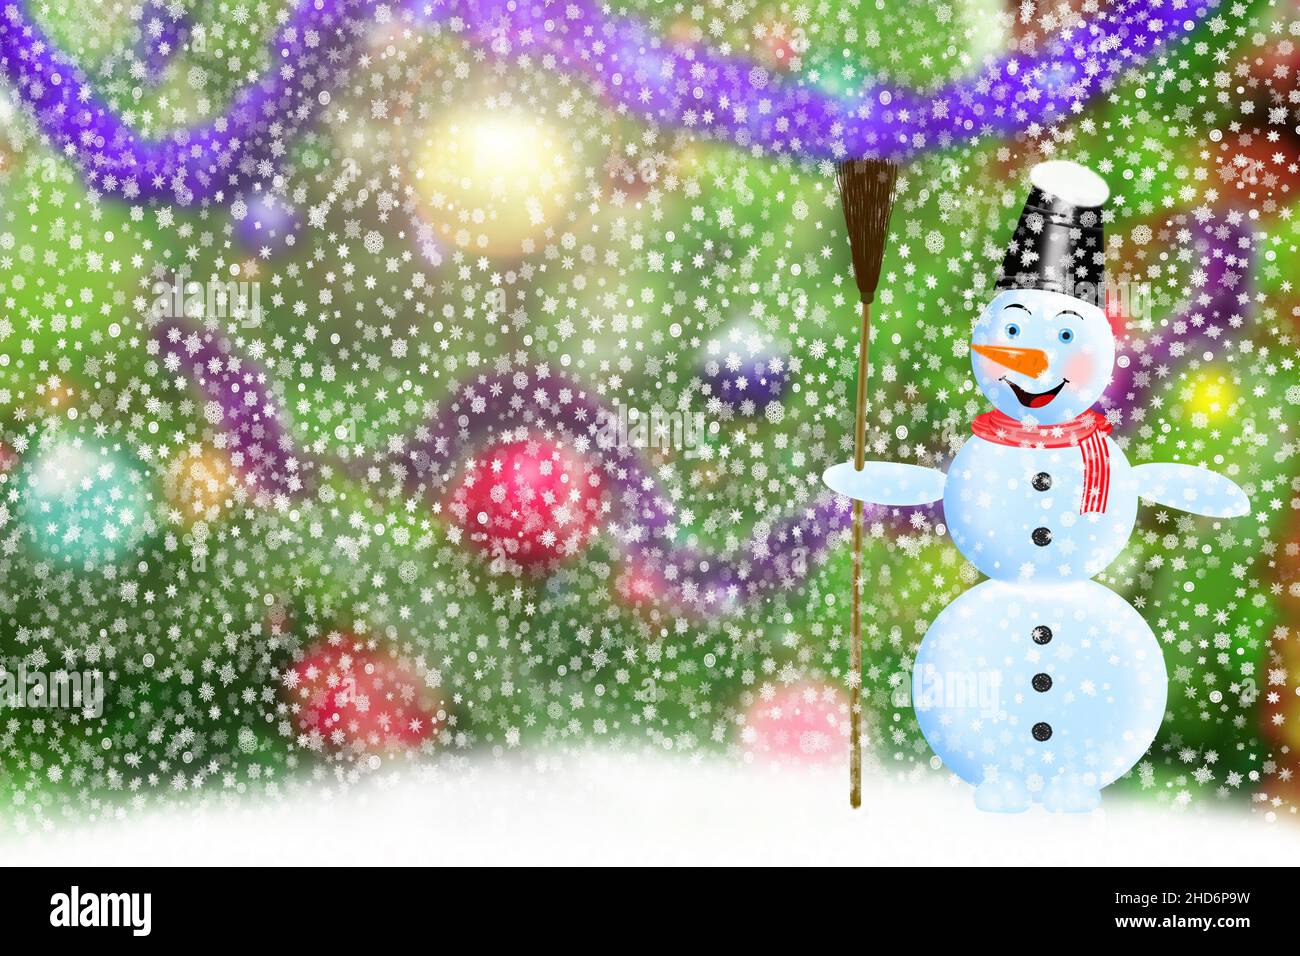 snowman at a harmonious and dressed up New Year's fur-tree. Stock Photo